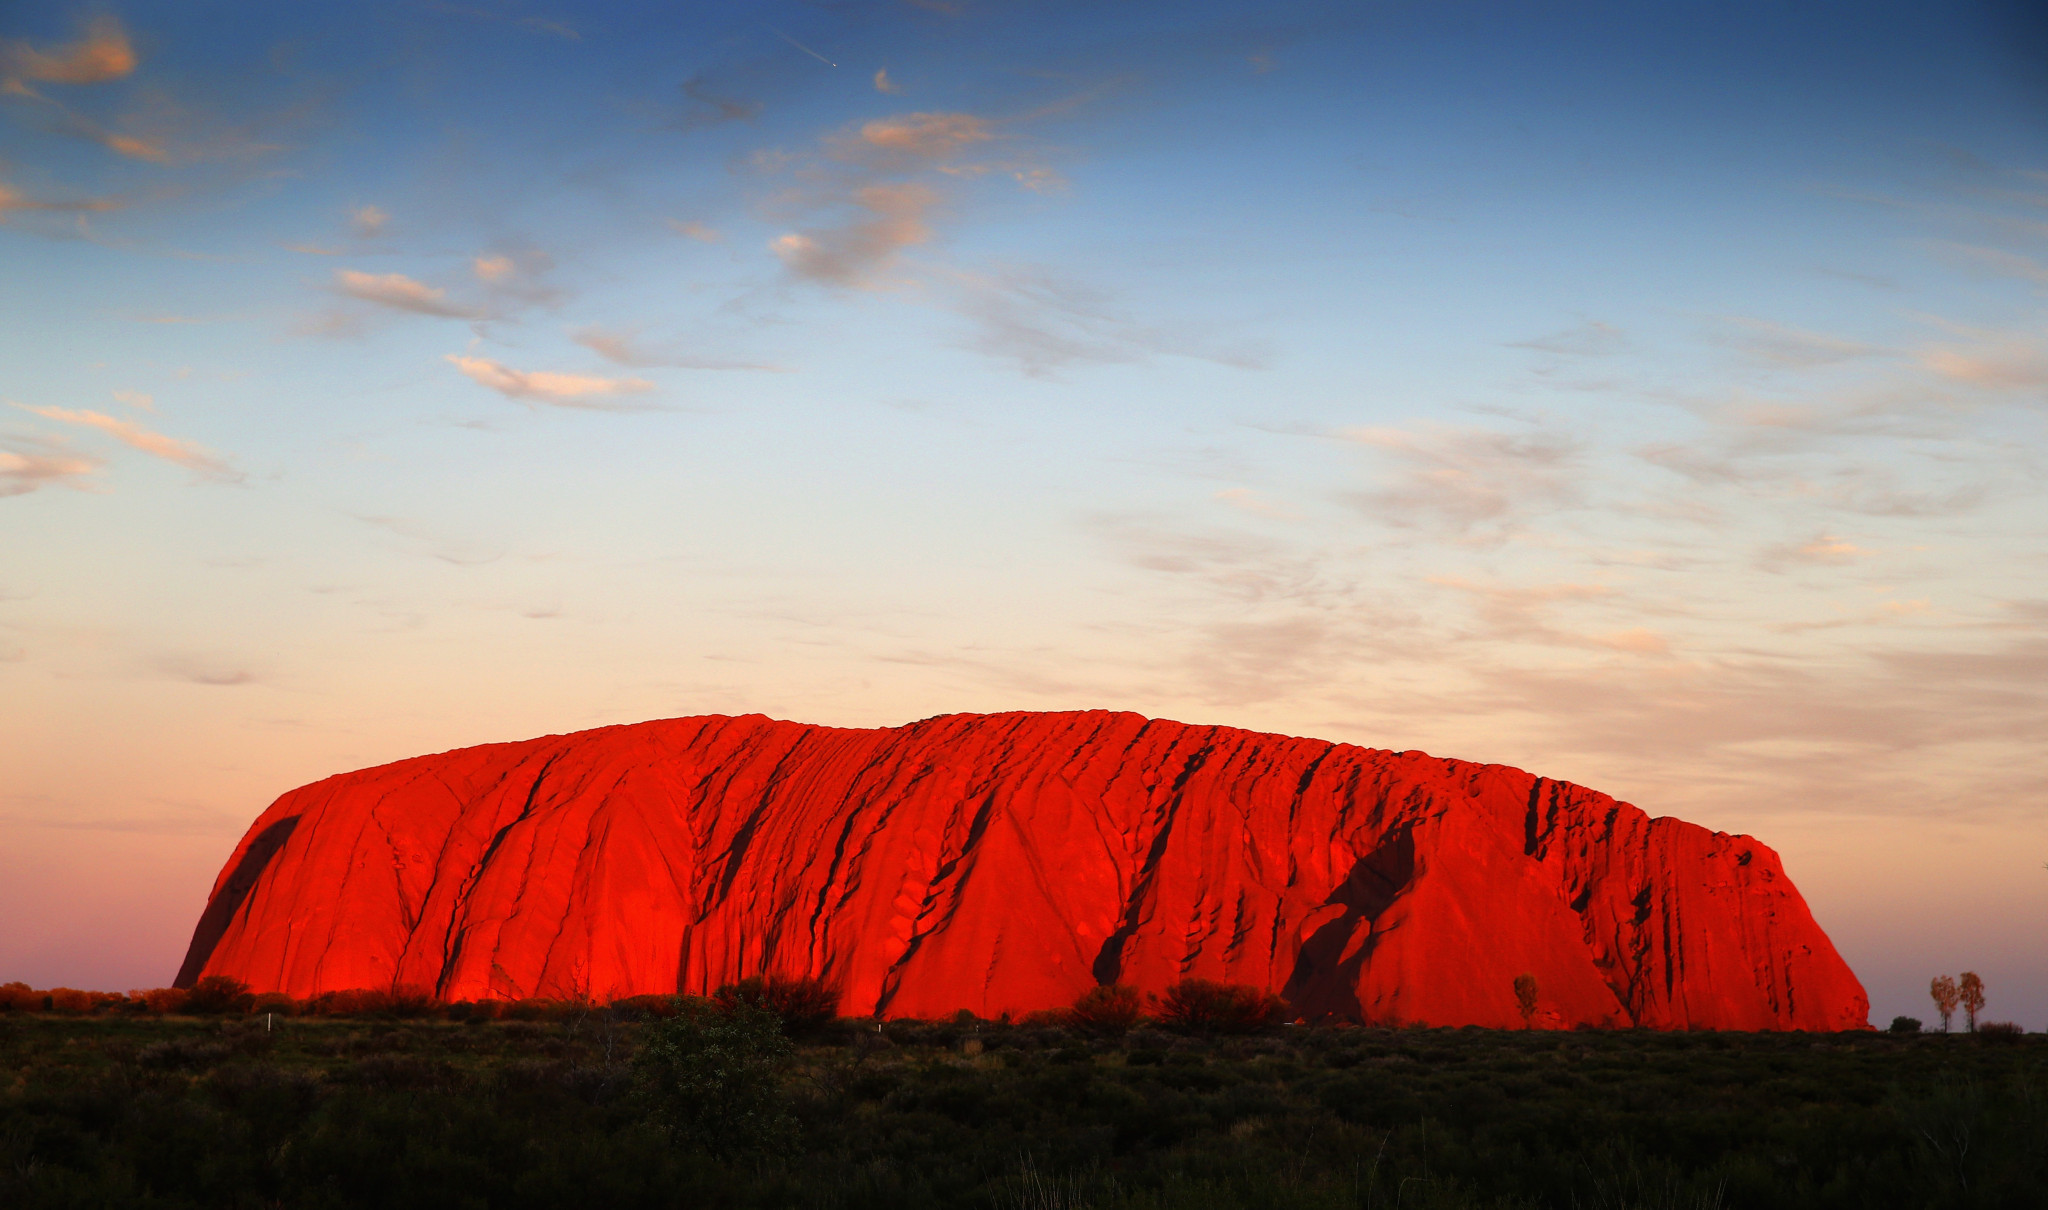 Ayers Rock is the most famous attraction in the Uluru-Kata Tjuta National Park ©Getty Images